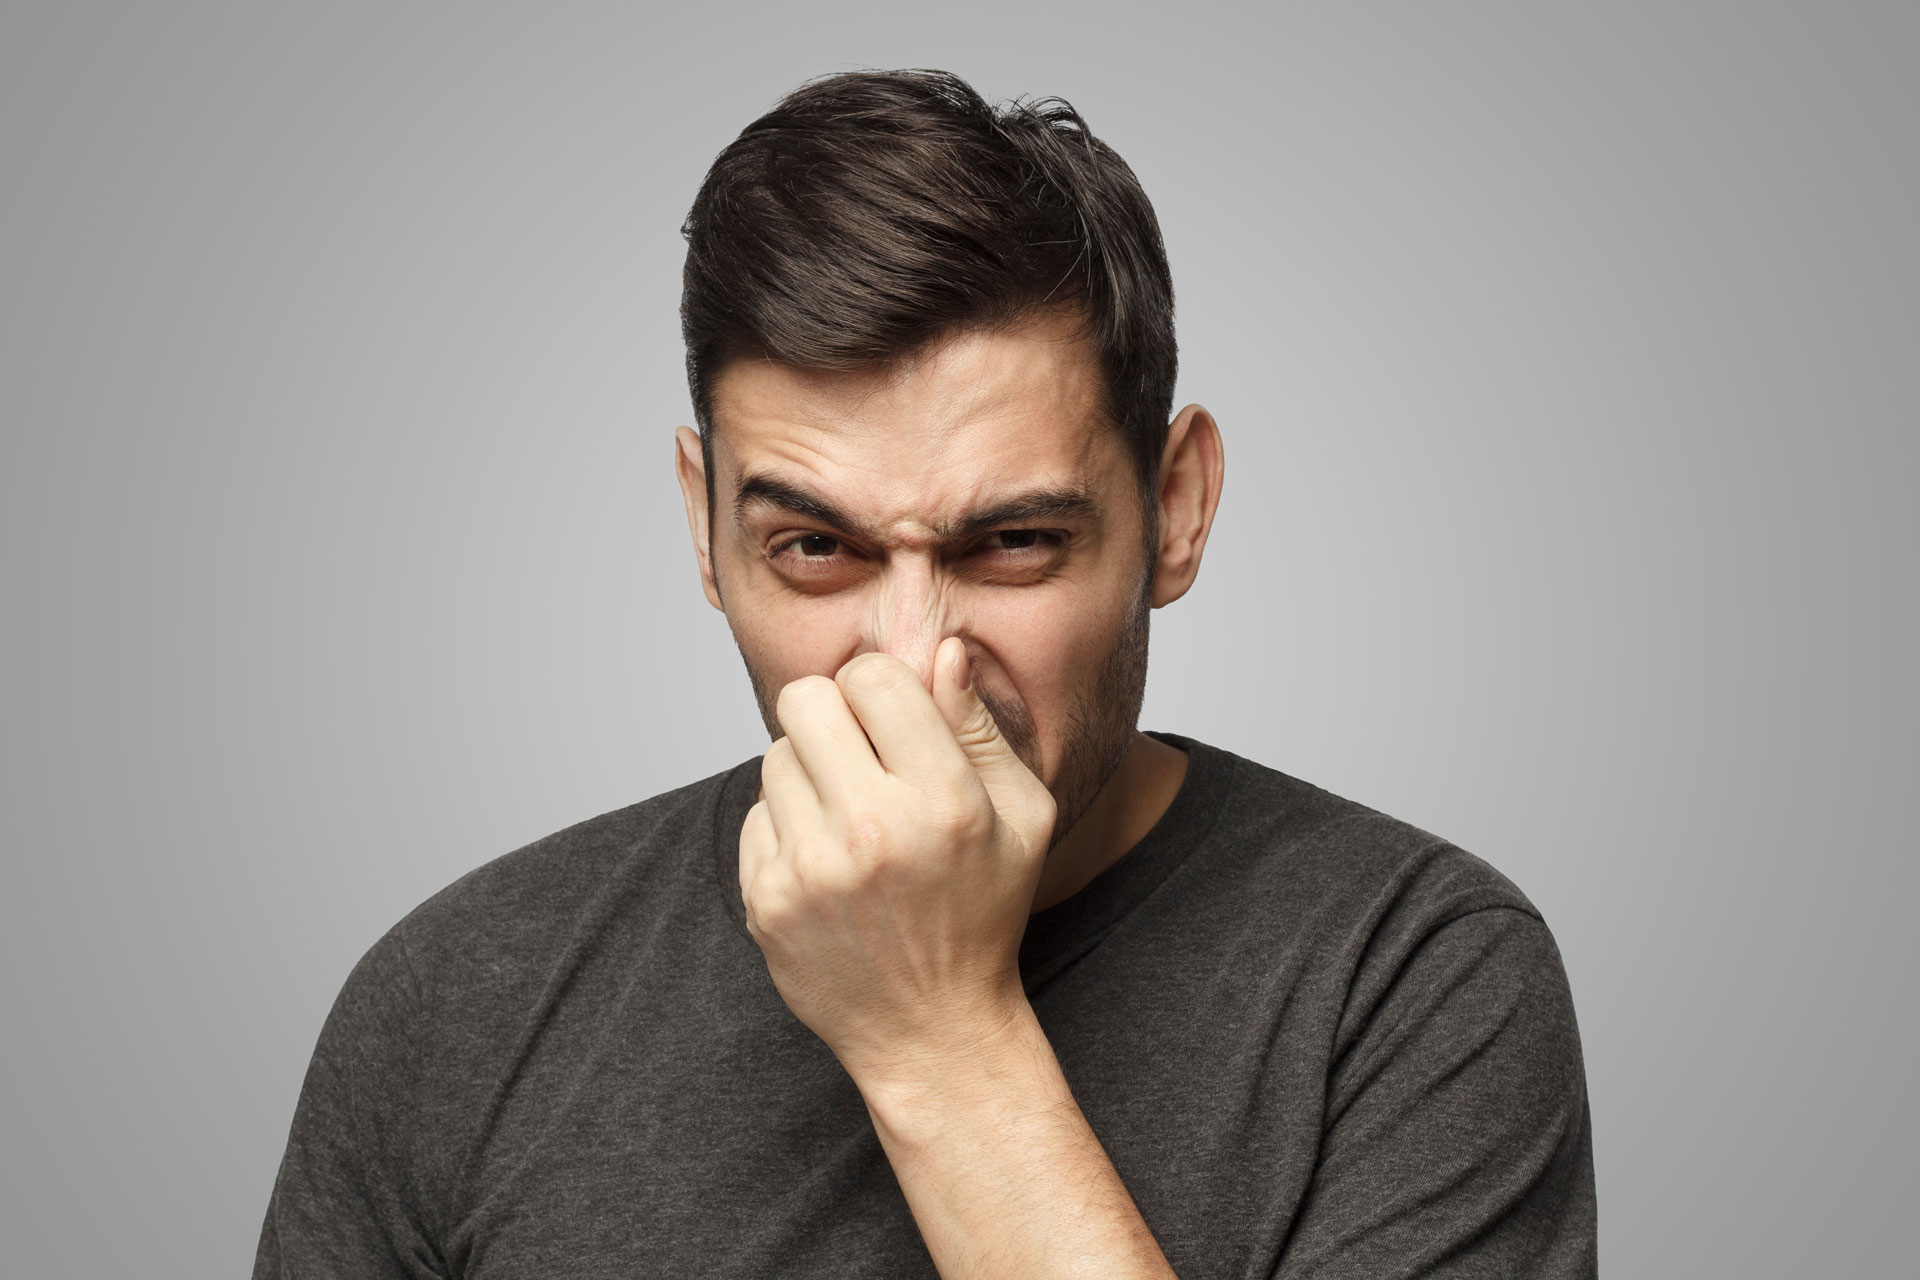 Photo of Man Pinching His Nose With His Fingers